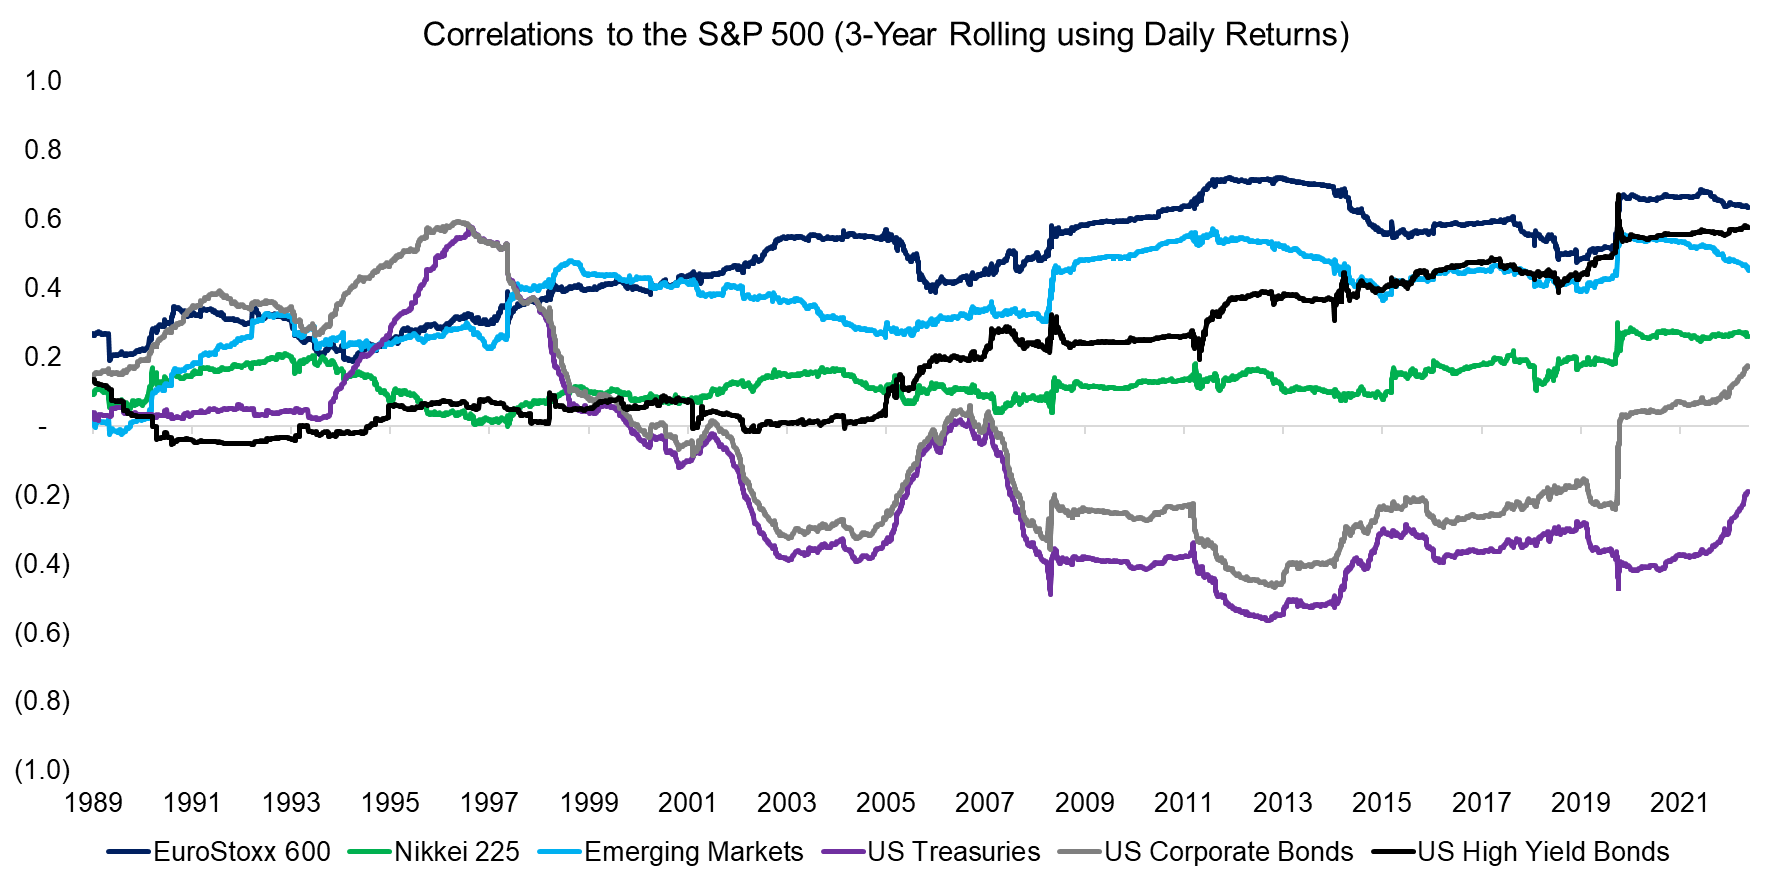 Correlations to the S&P 500 (3-Year Rolling using Daily Returns)